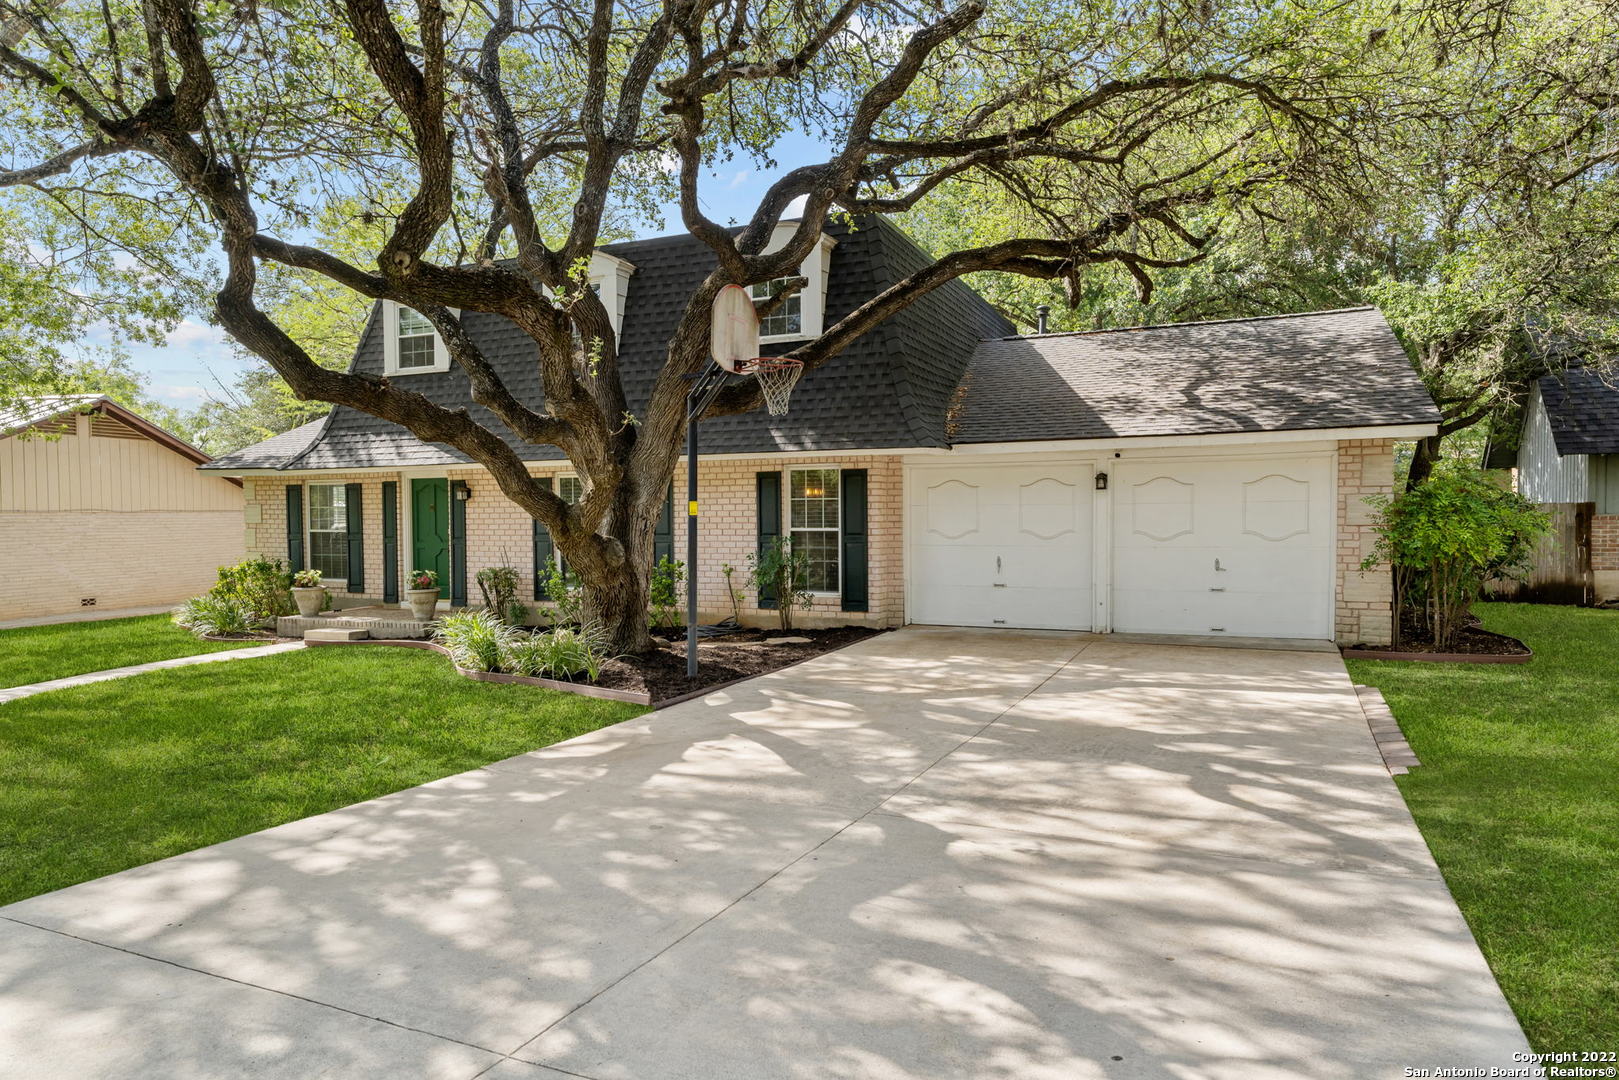 ATTN*****MULTIPLE OFFERS RECEIVED. PLEASE SUBMIT BEST AND HIGHEST OFFER BY MONDAY 6/20/22 8PM CST TO Realtorcgates@yahoo.com, text to let me know it's coming Thank you!   OPEN HOUSE 6/18 and 6/19 2-4pm. Adorable home in Enchanted Forest with a glistening pool, oversized backyard with lots of mature trees is ready and waiting for you to entertain on these HOT summer days and nights! Open concept with two living areas and a formal dining area. Kitchen is updated with a breakfast area. Master bedroom and bathroom are downstairs with three supersized bedrooms and bathroom upstairs. All of this, with some of the top rated schools in San Antonio. Hurry up, this darling little home  won't last long!